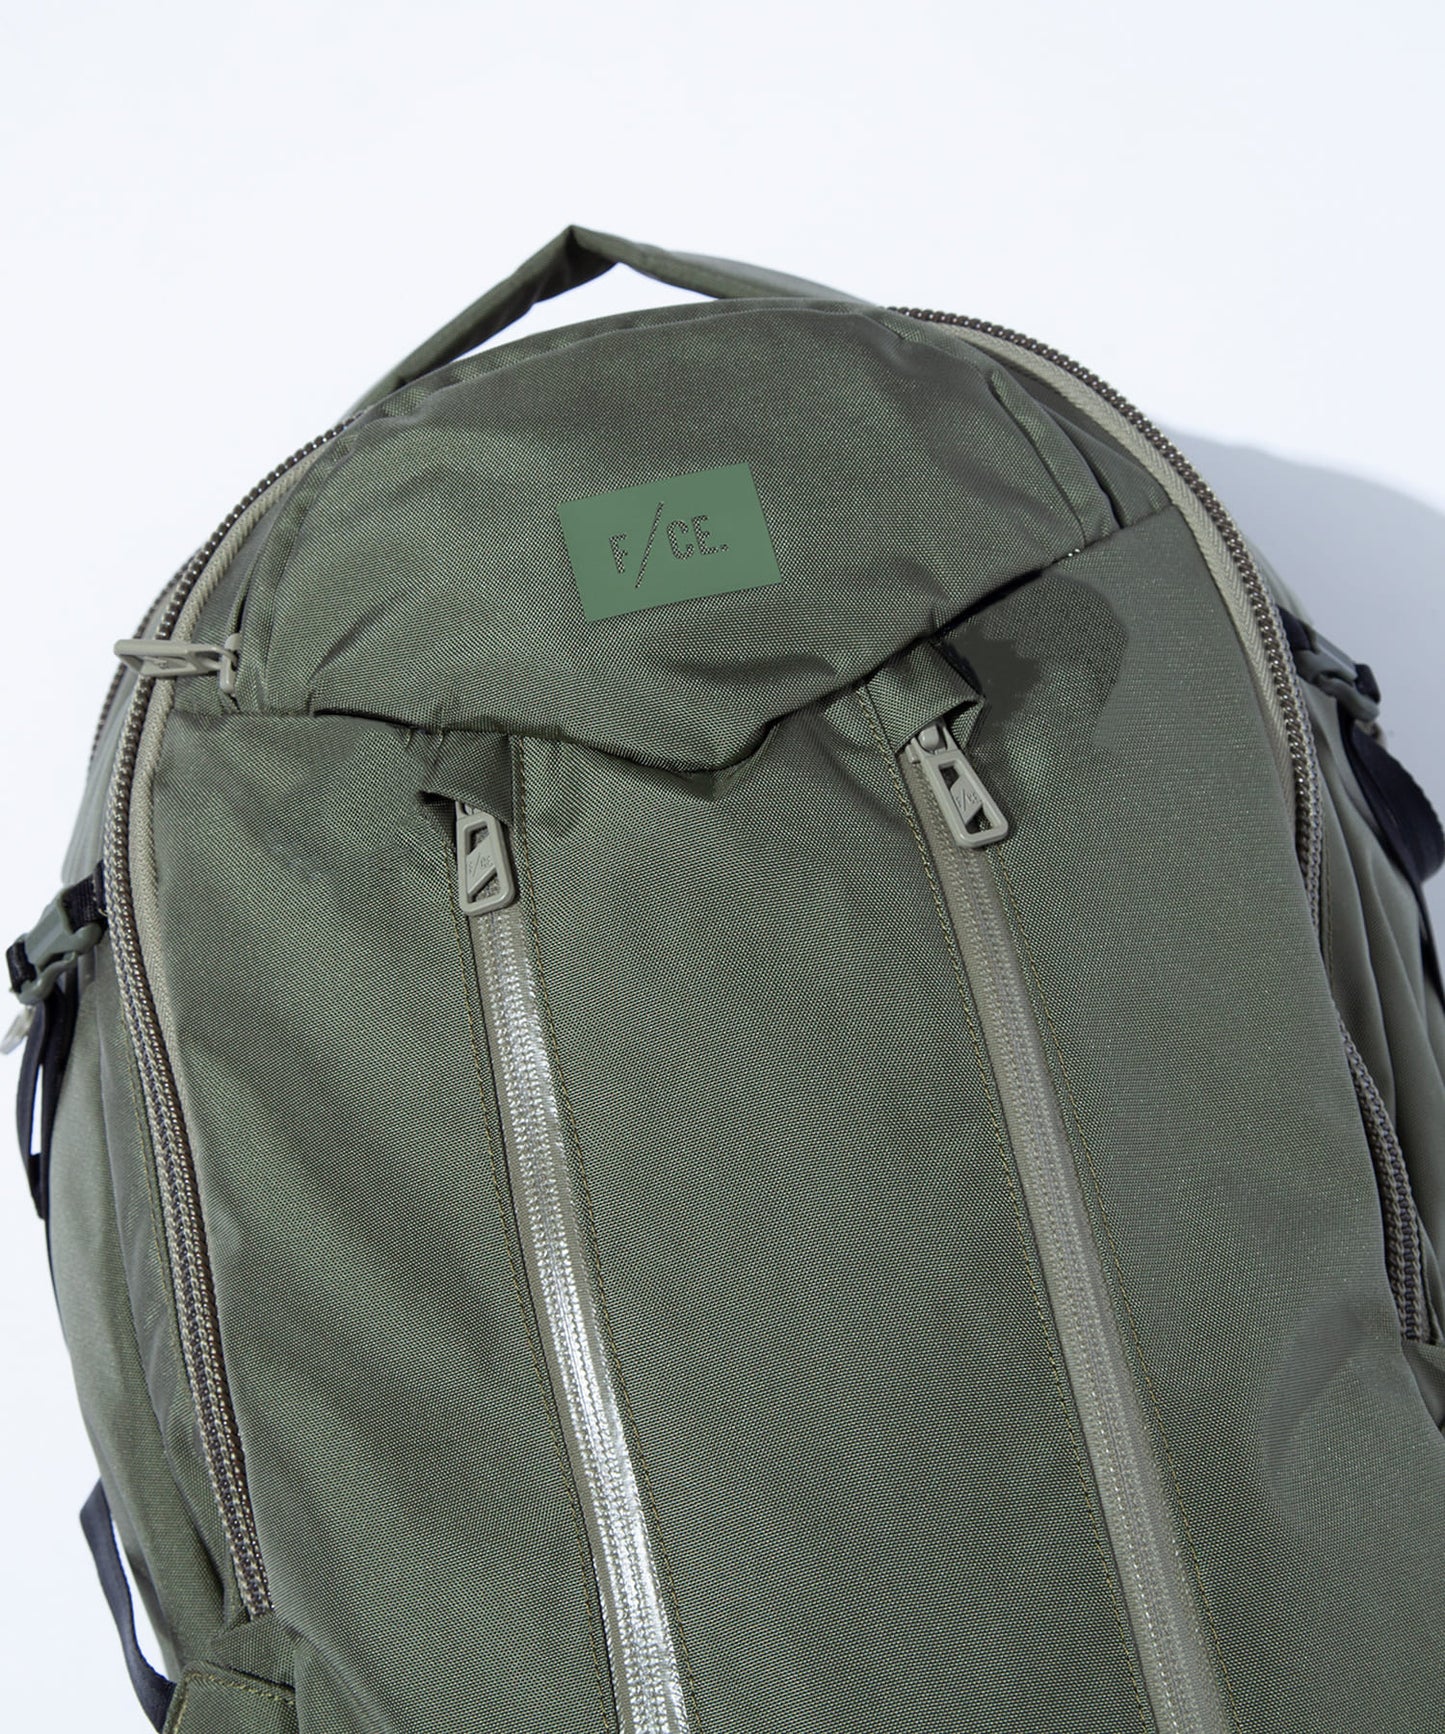 F/CE. ROBIC DAYTRIP BACKPACK